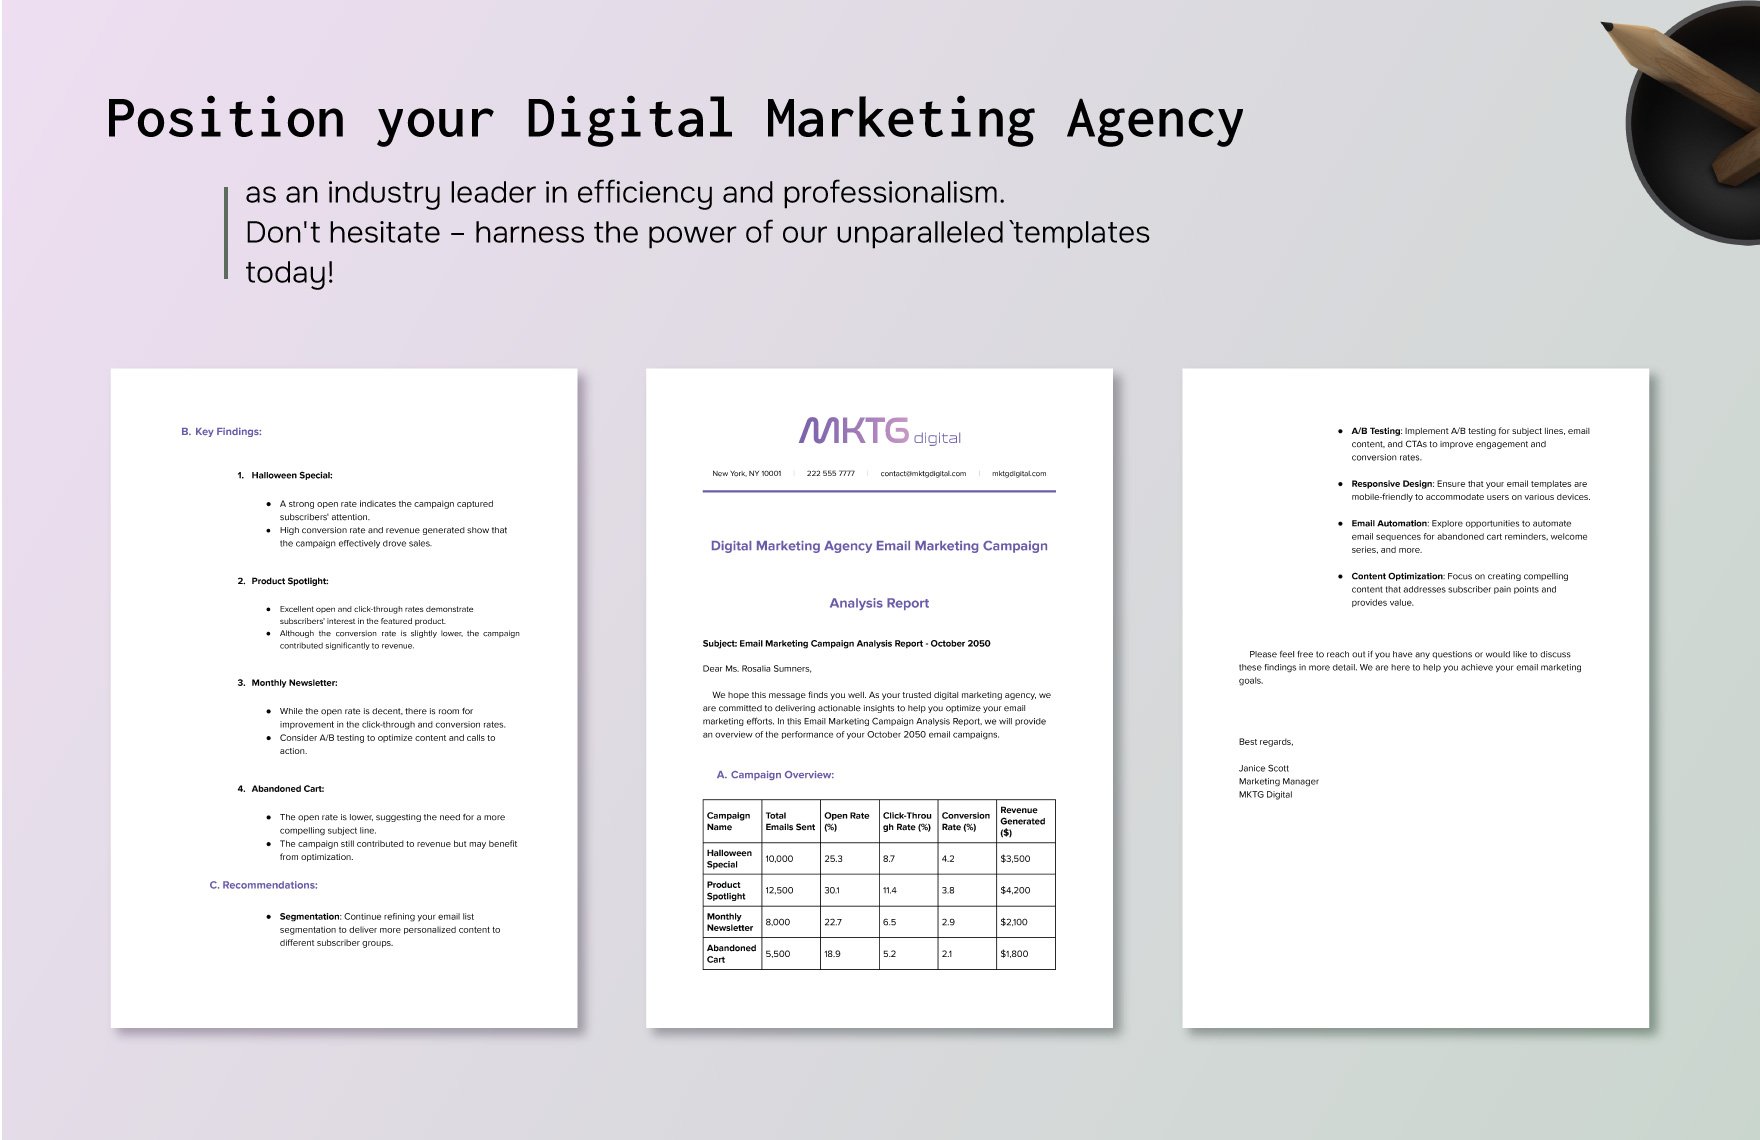 Digital Marketing Agency Email Marketing Campaign Analysis Report Template